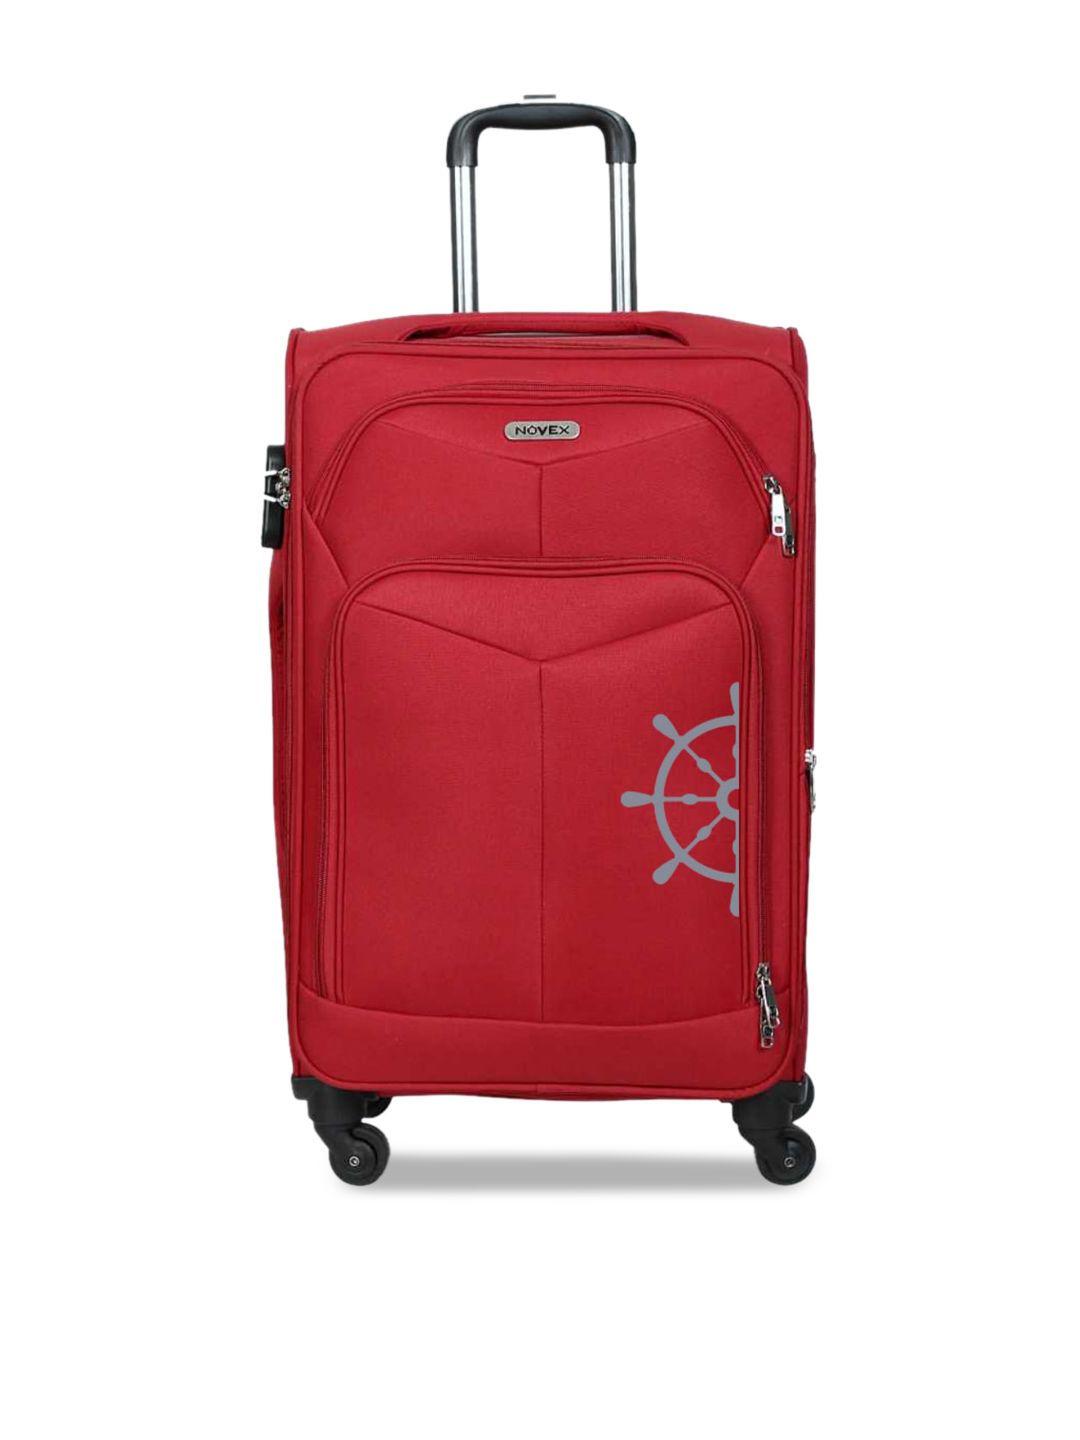 NOVEX Red Printed Soft-Sided Large Trolley Suitcase Price in India